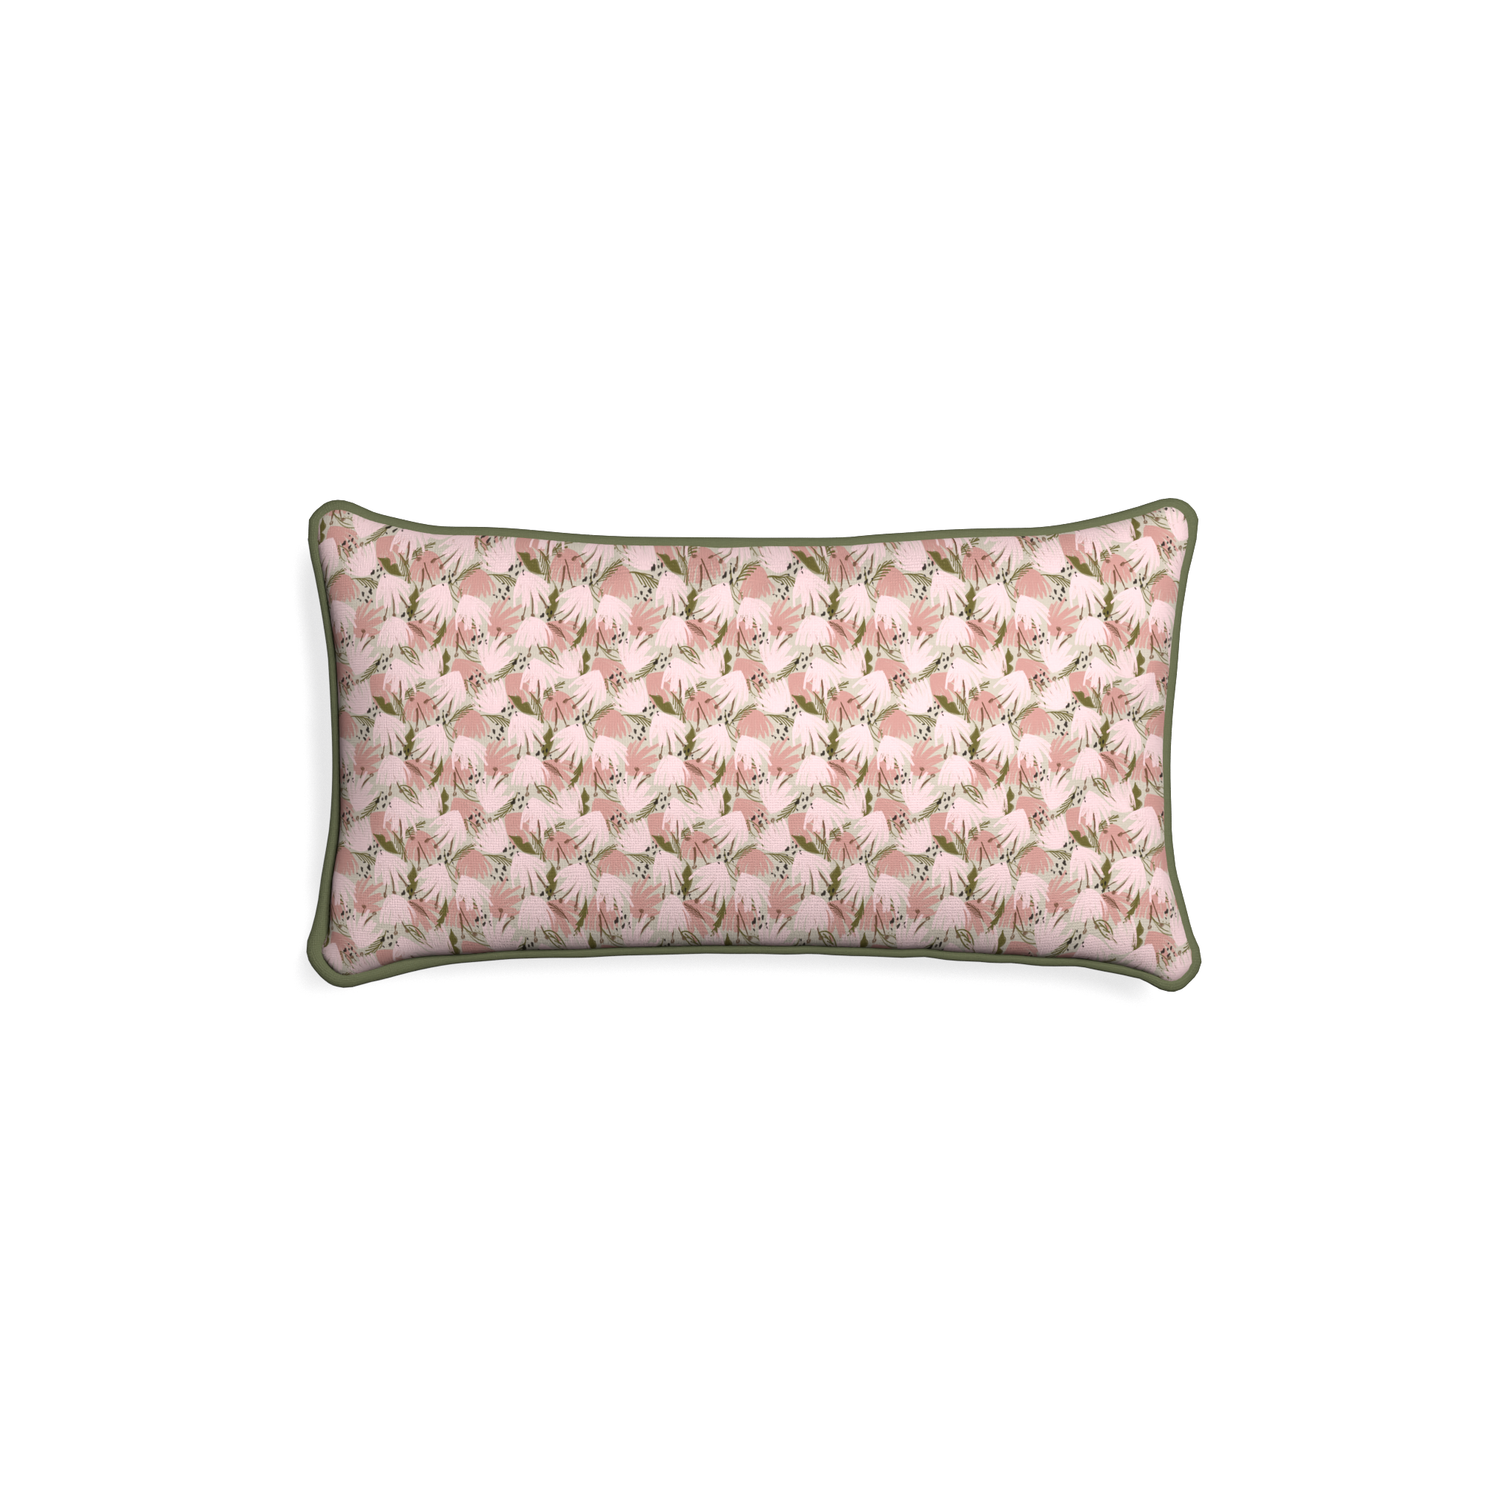 Petite-lumbar eden pink custom pink floralpillow with f piping on white background